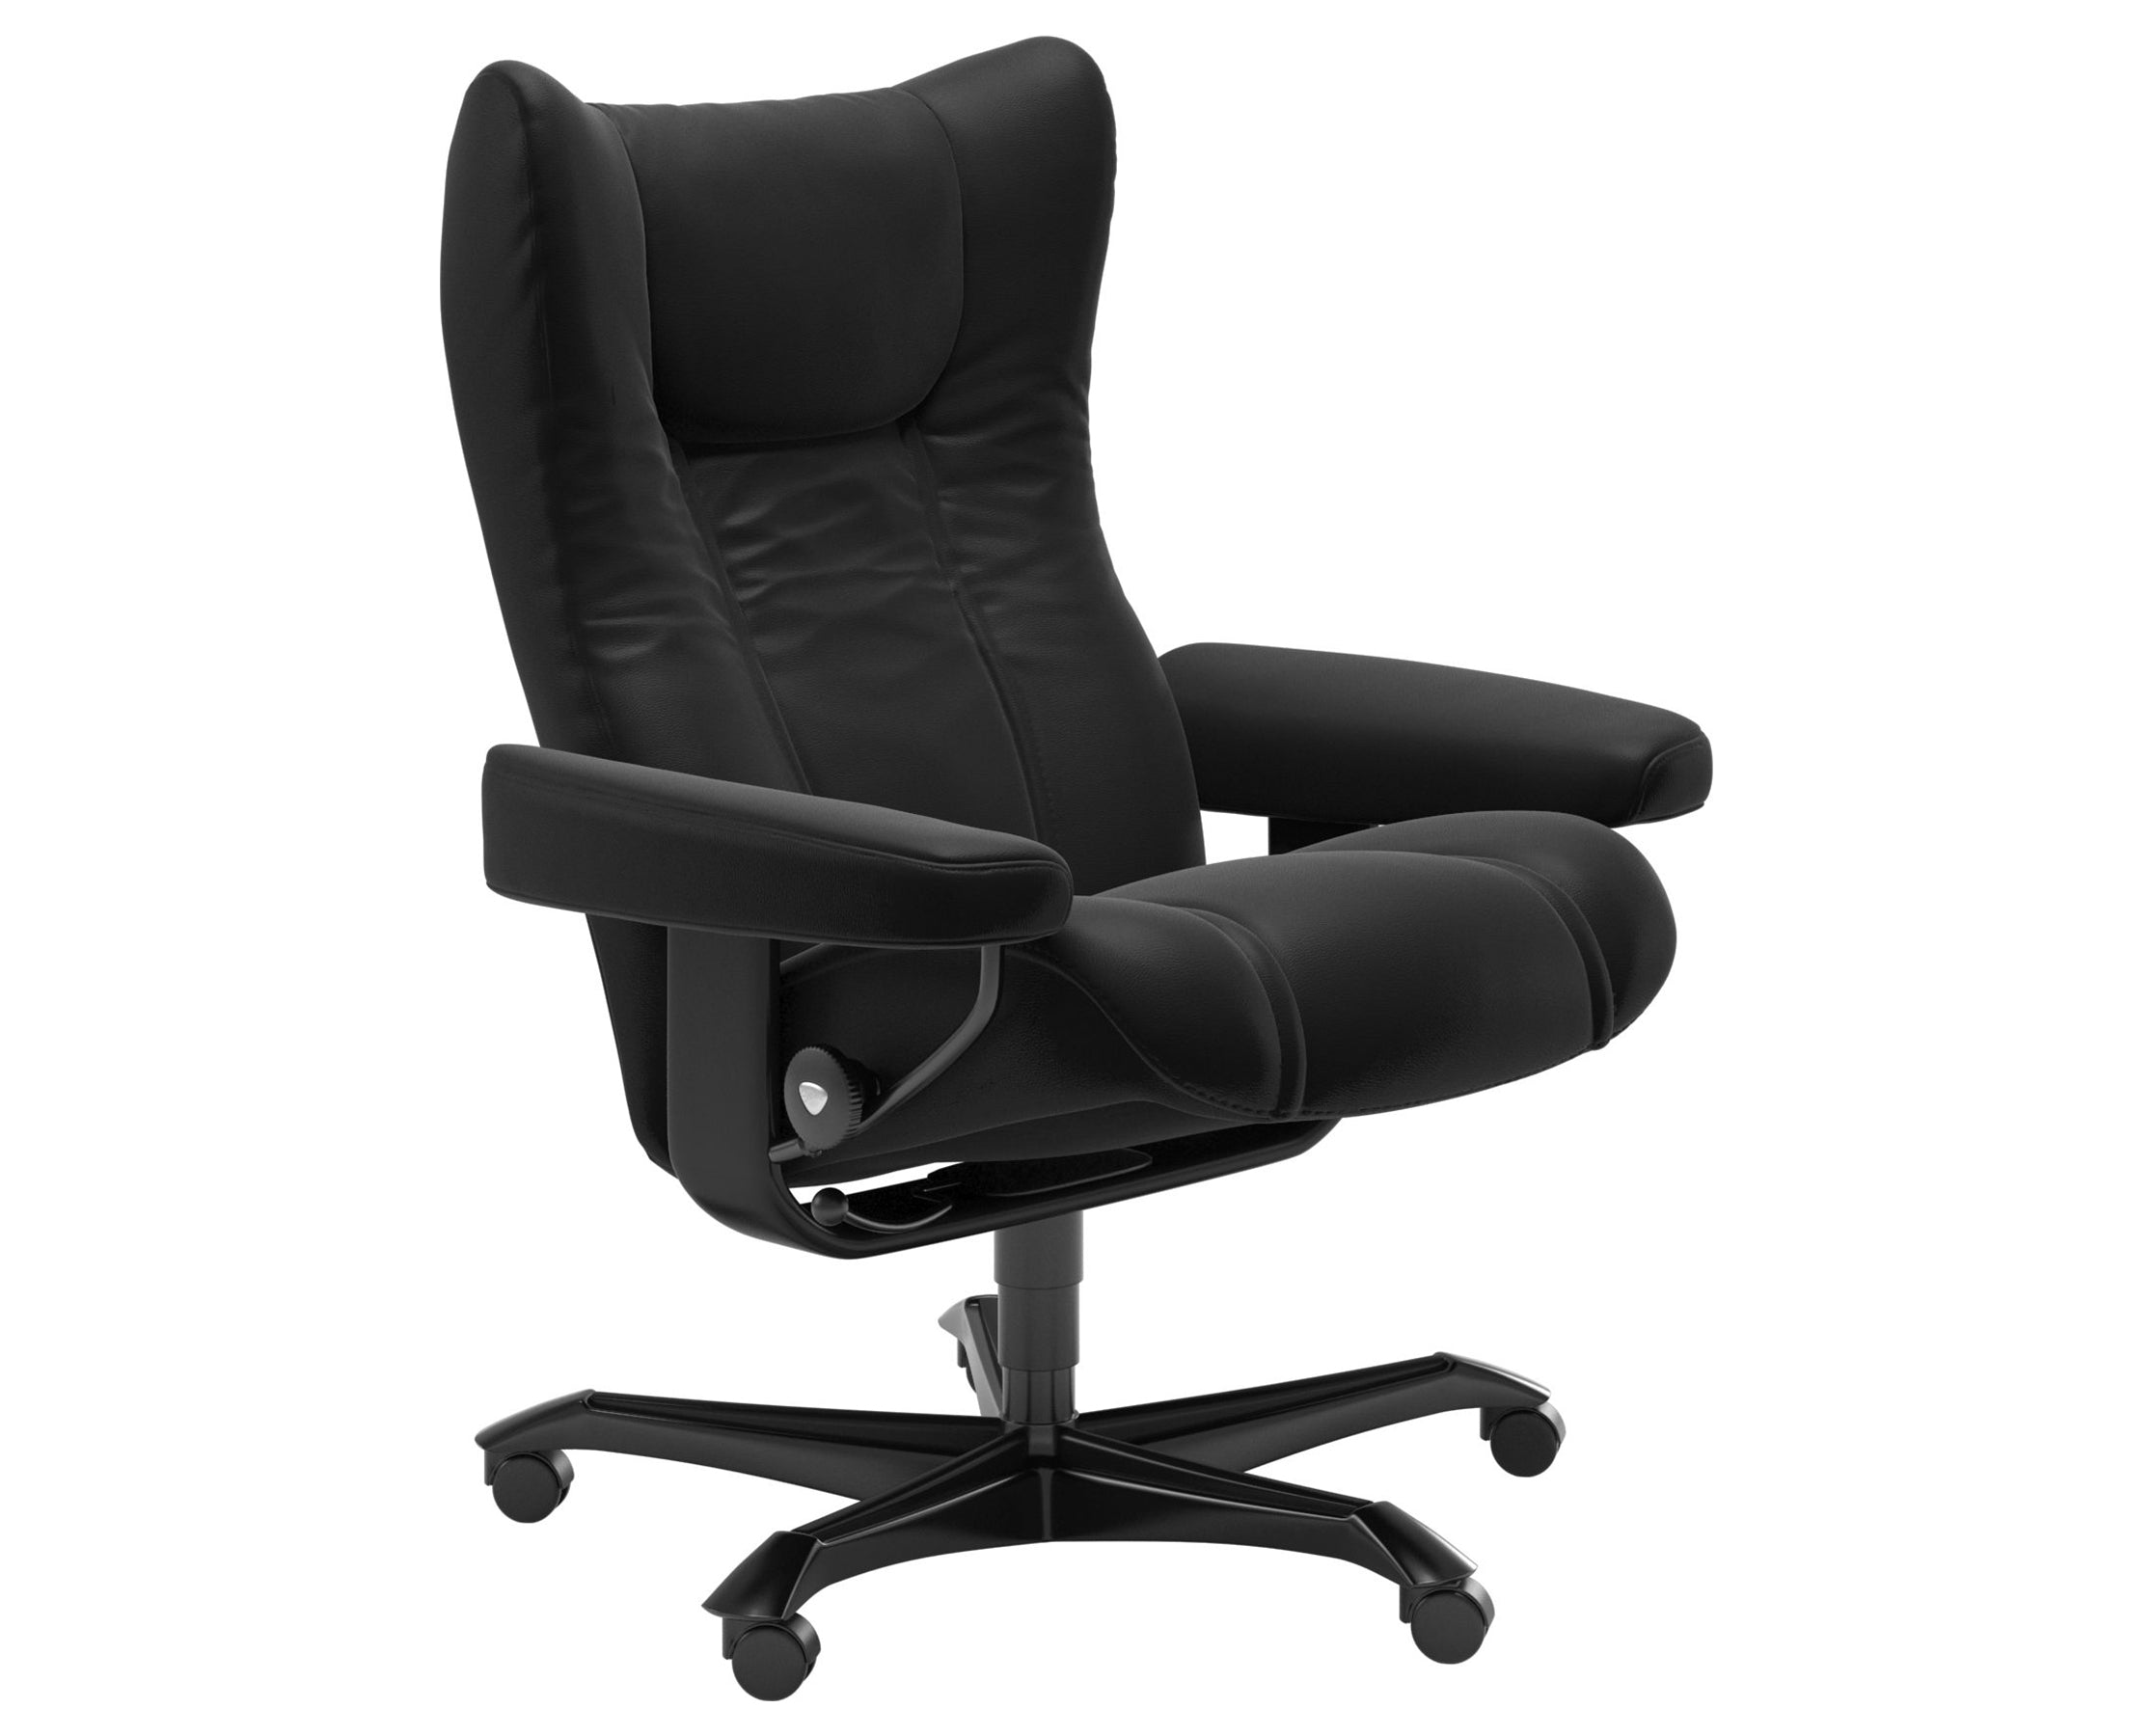 Paloma Leather Black M and Black Base | Stressless Wing Home Office Chair | Valley Ridge Furniture